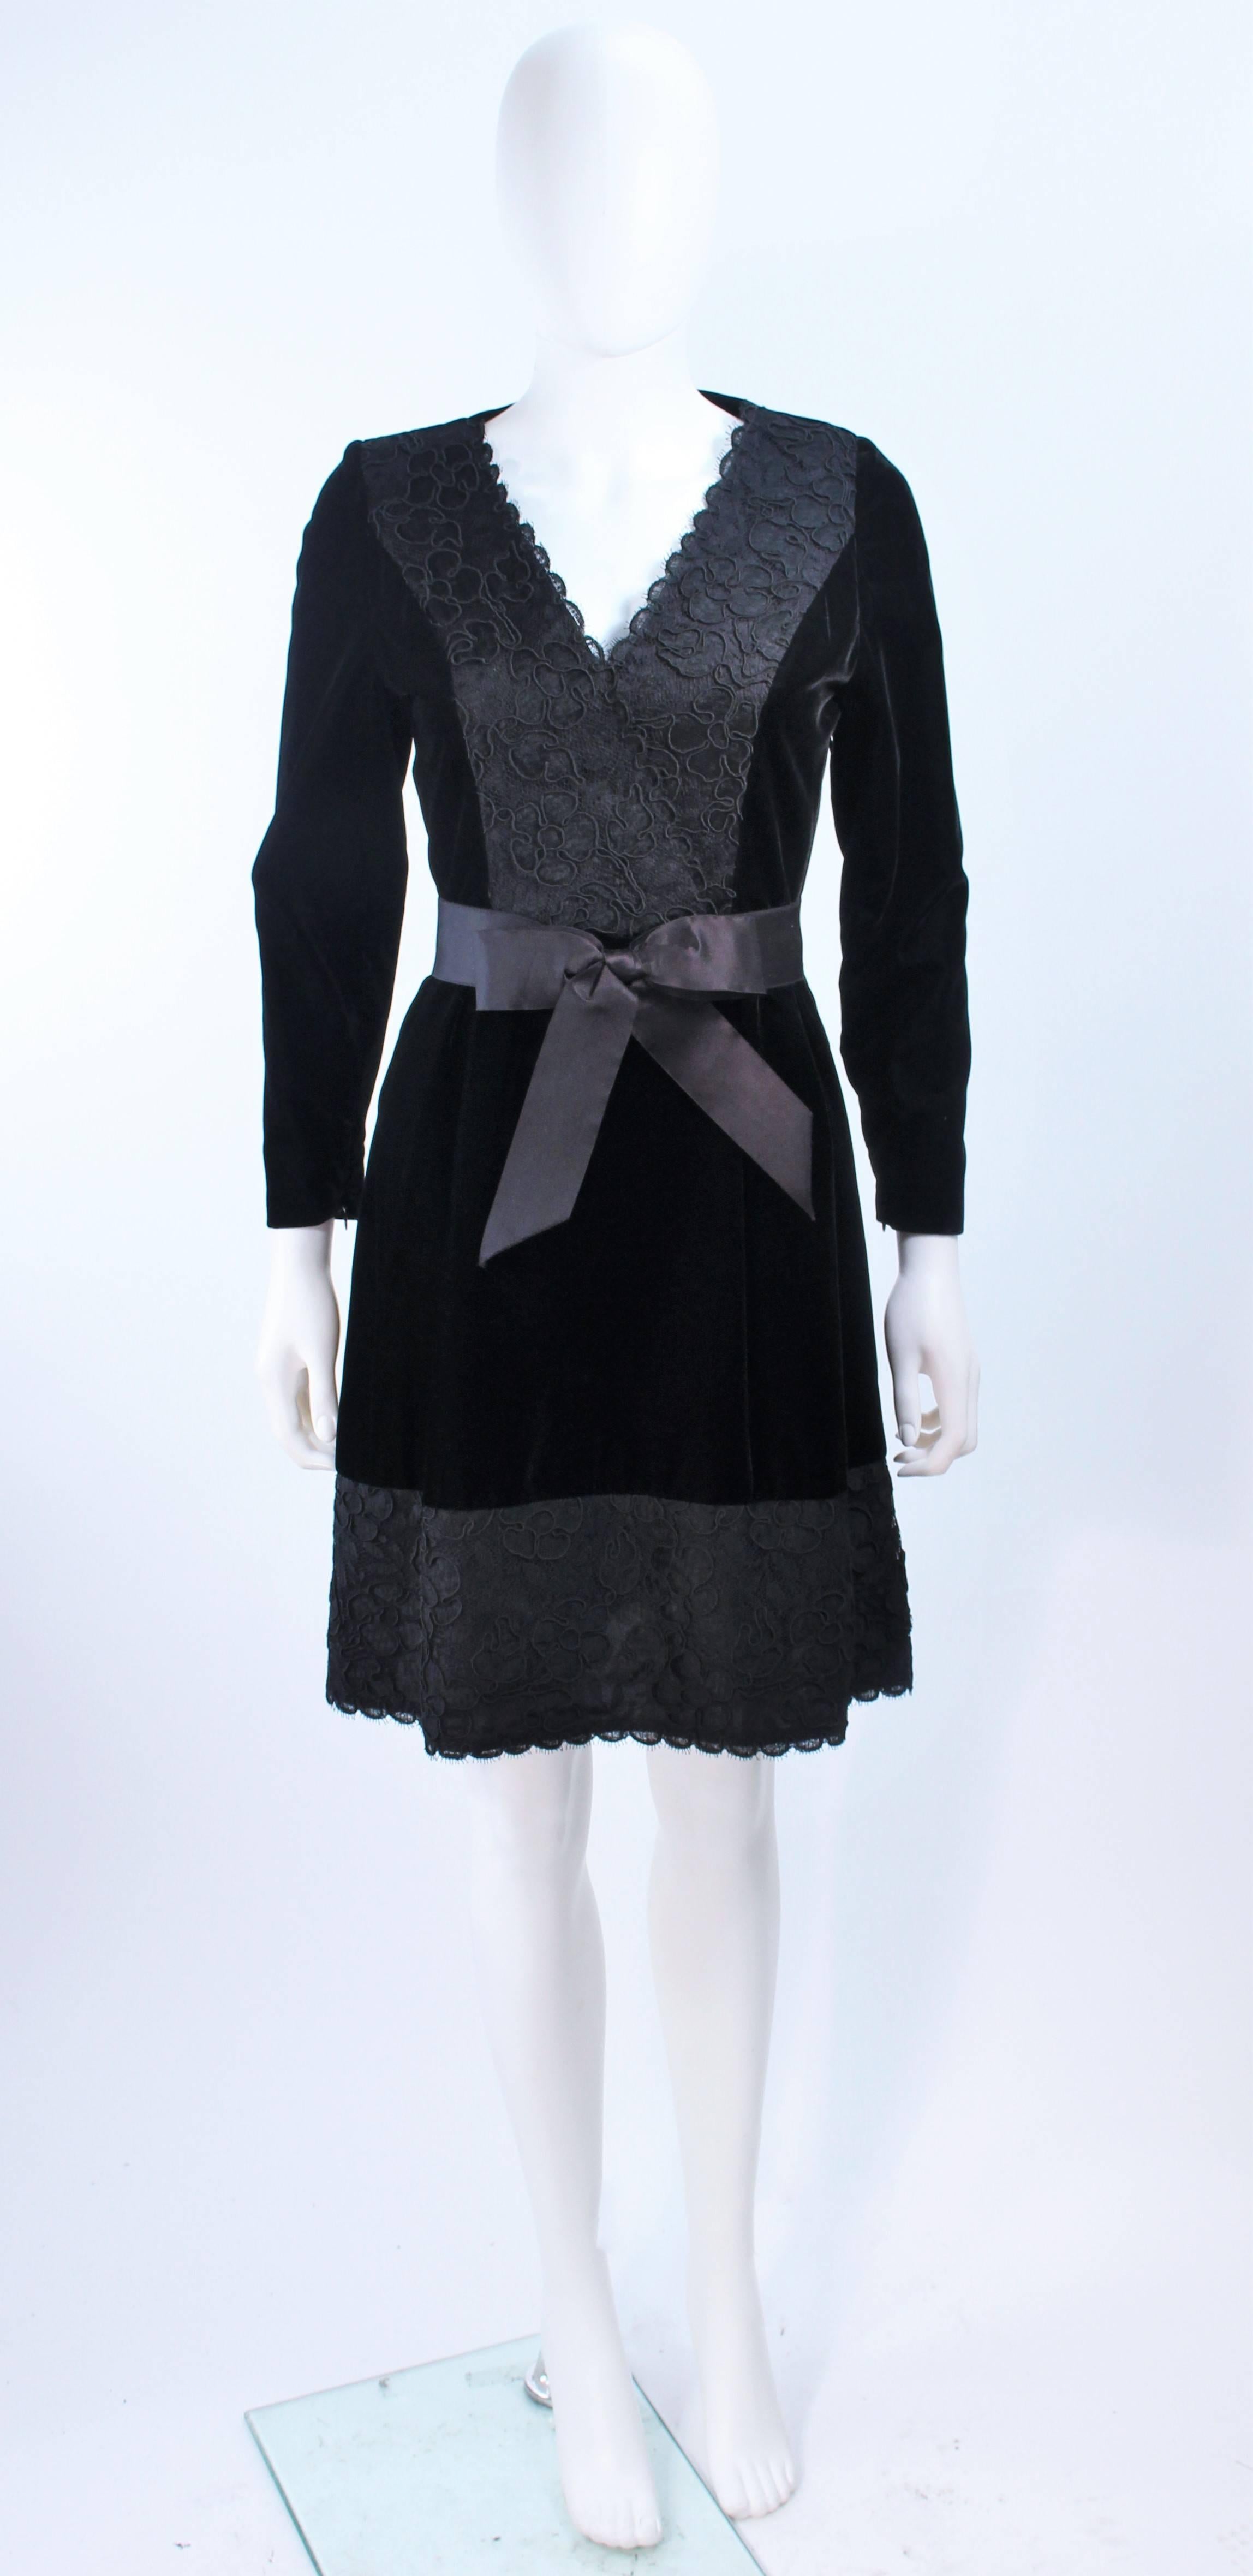 This Givenchy cocktail dress is composed of a beautiful velvet with lace trim. Features a satin belt and center back zipper closure. In excellent vintage condition.

**Please cross-reference measurements for personal accuracy. Size in description